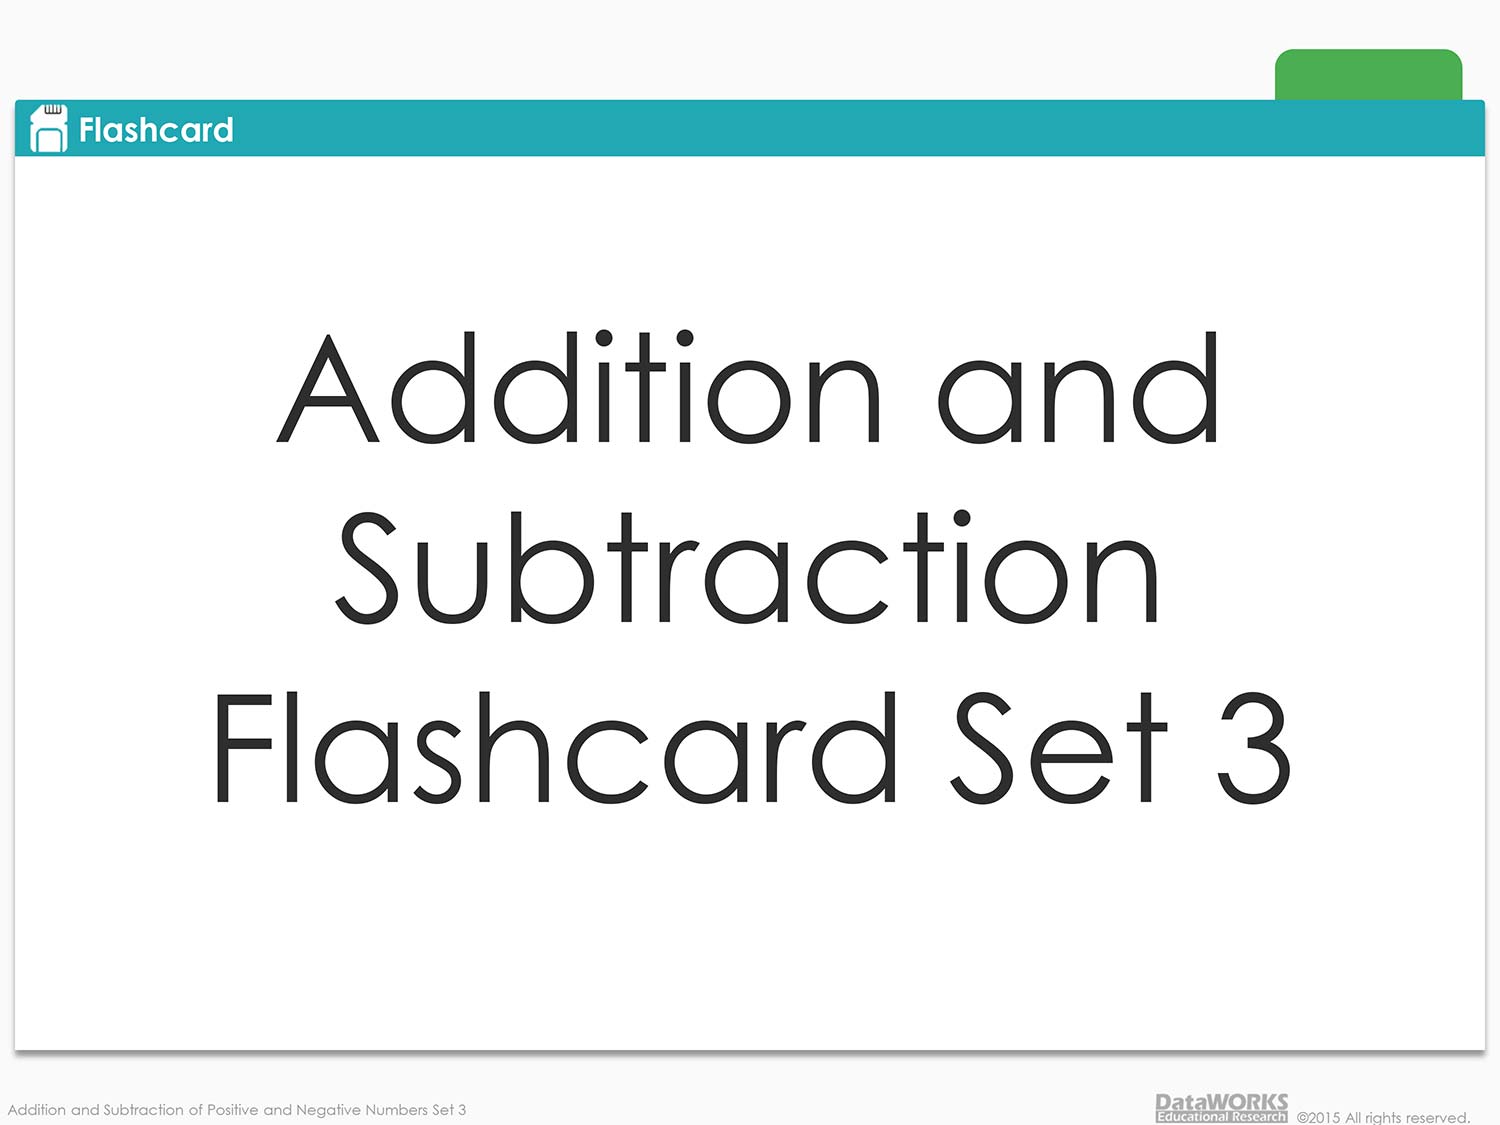 addition-and-subtraction-of-positive-and-negative-numbers-flashcards-set-3-lesson-plans